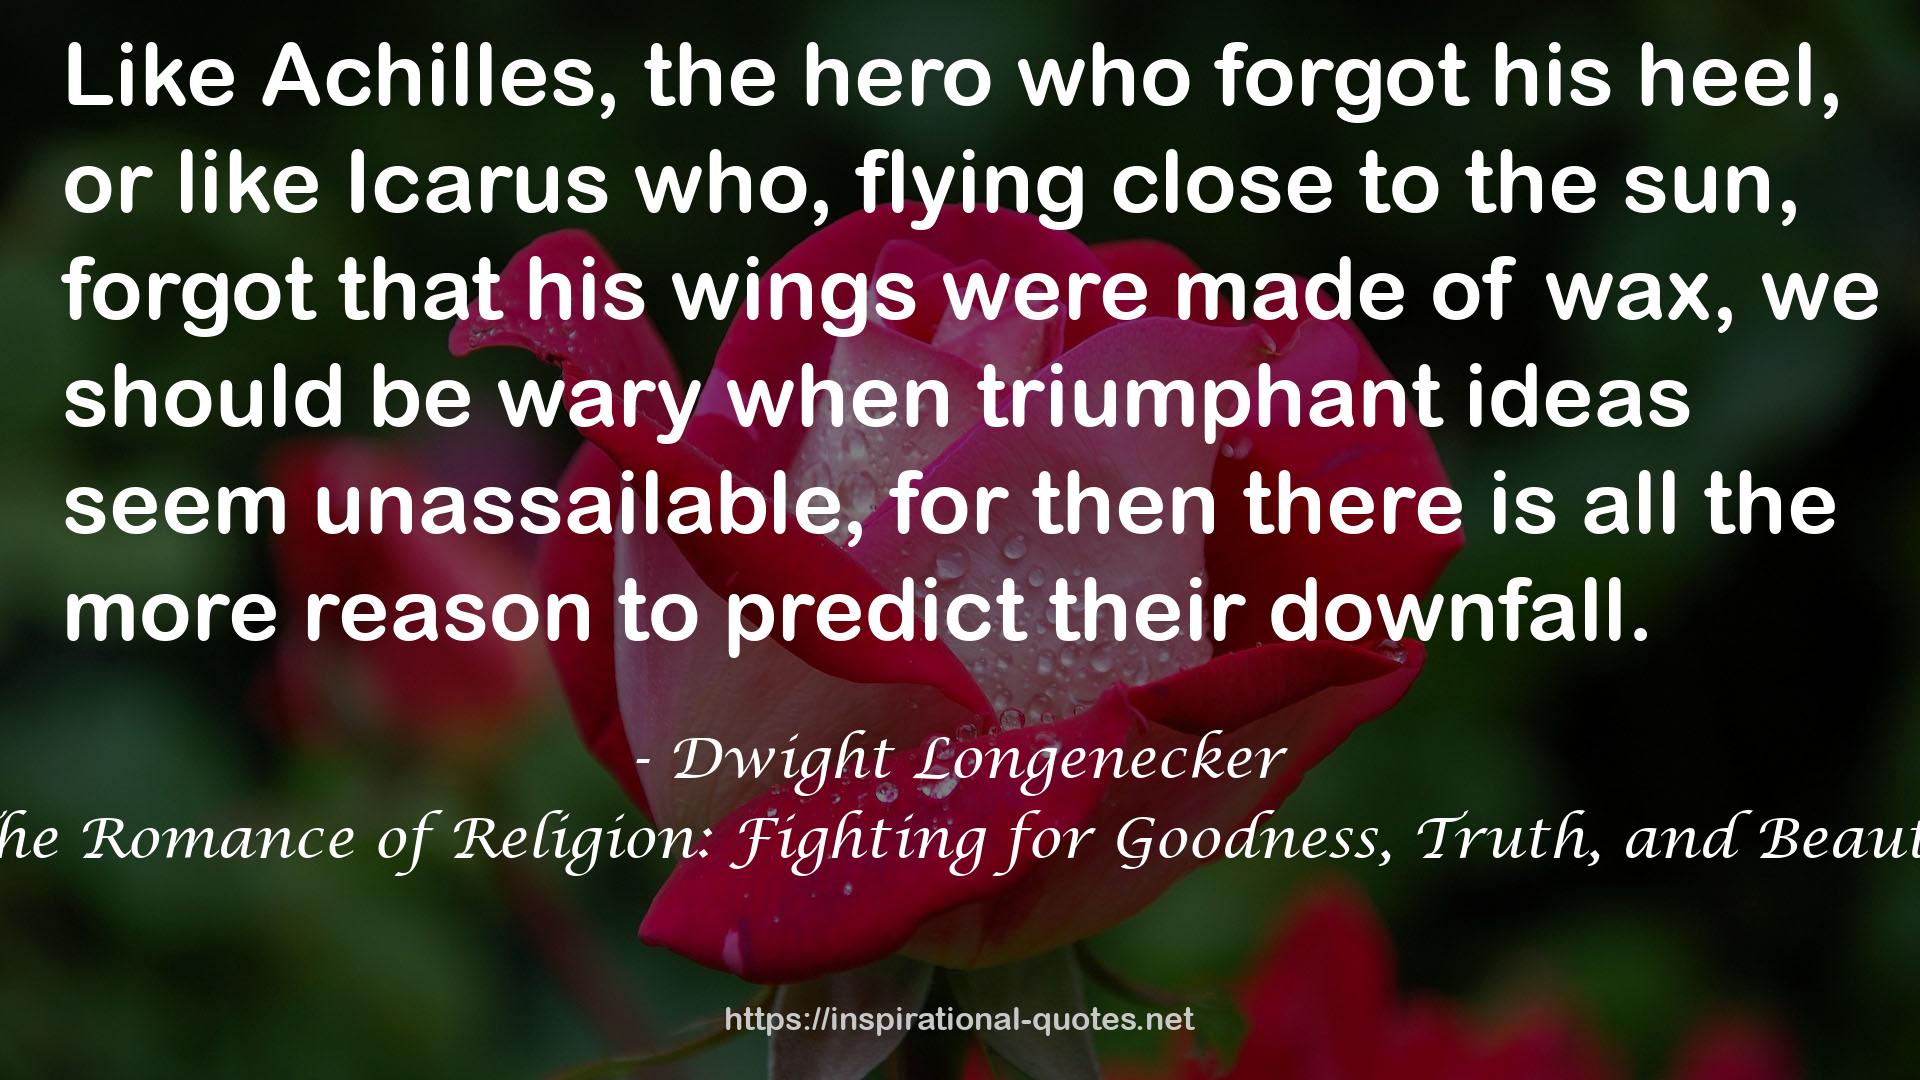 The Romance of Religion: Fighting for Goodness, Truth, and Beauty QUOTES